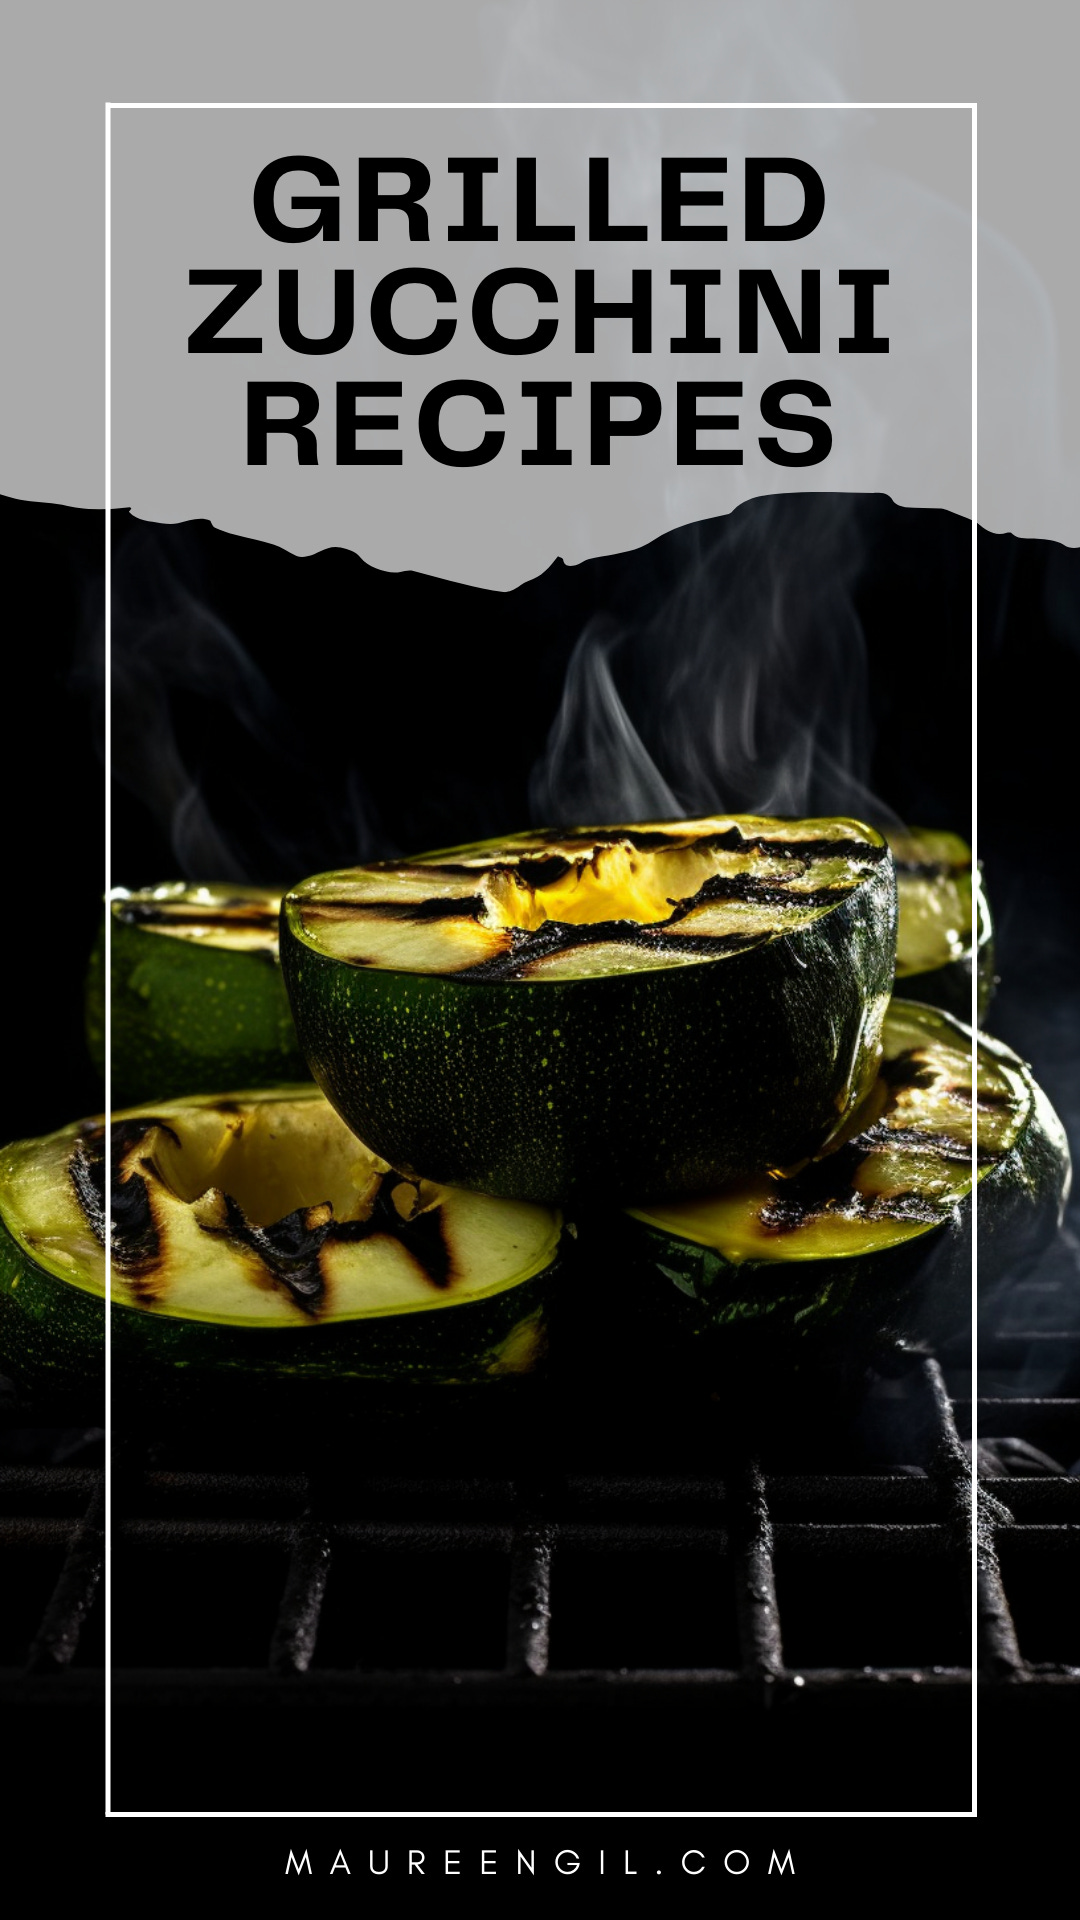 Happy July 4th, my wonderful readers! Today, I have a special edition of the newsletter, as The Husband and I navigate our first holiday totally kid-less. In honor of her, I whipped up some of these grilled zucchini recipes. Because she’s vegetarian, and she would appreciate them. (Maybe. Who knows with kids?)